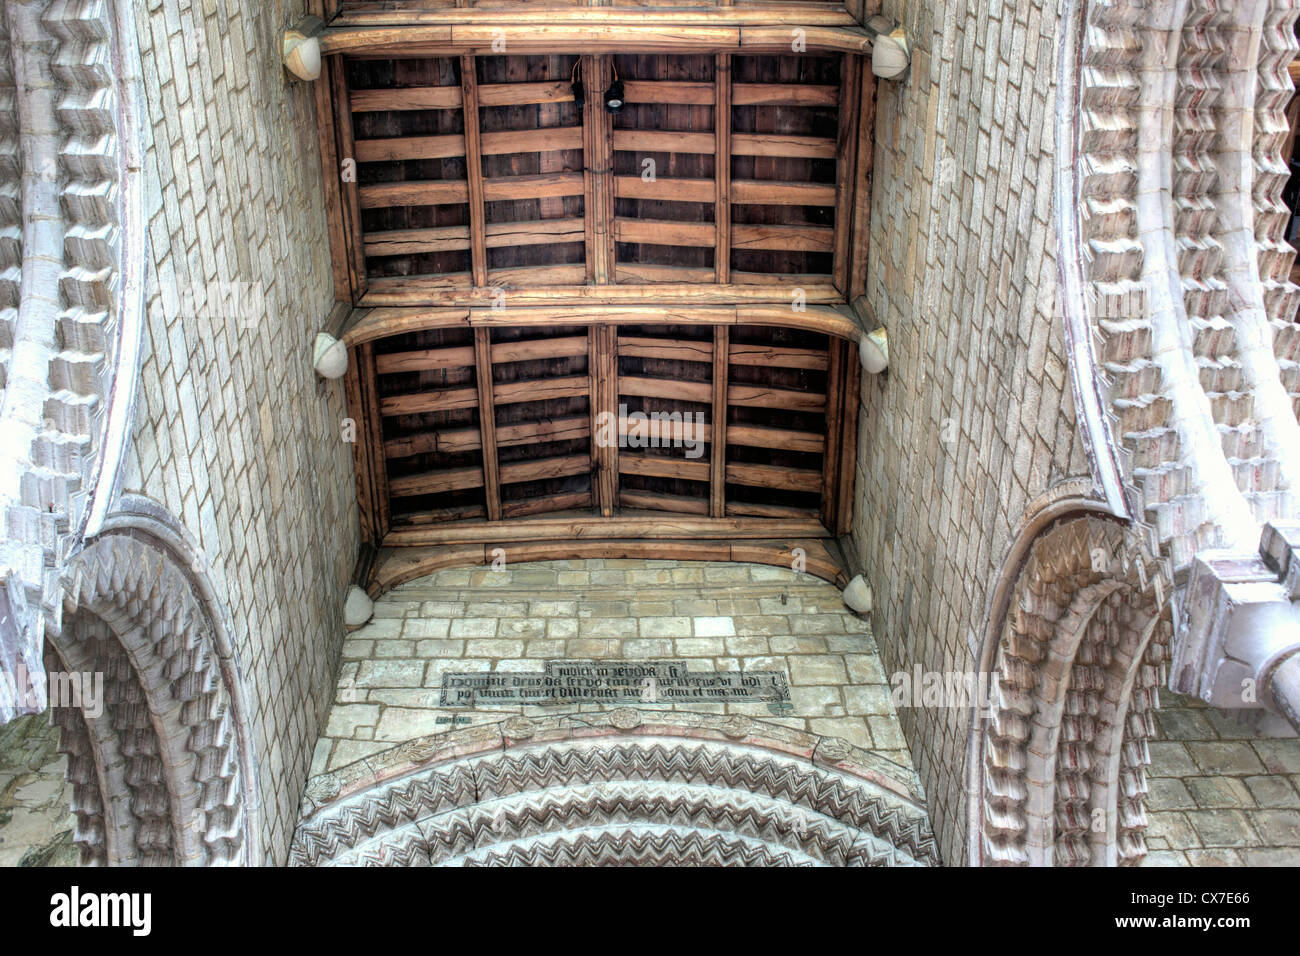 Ceiling of Durham Cathedral, Durham, North East England, UK Stock Photo